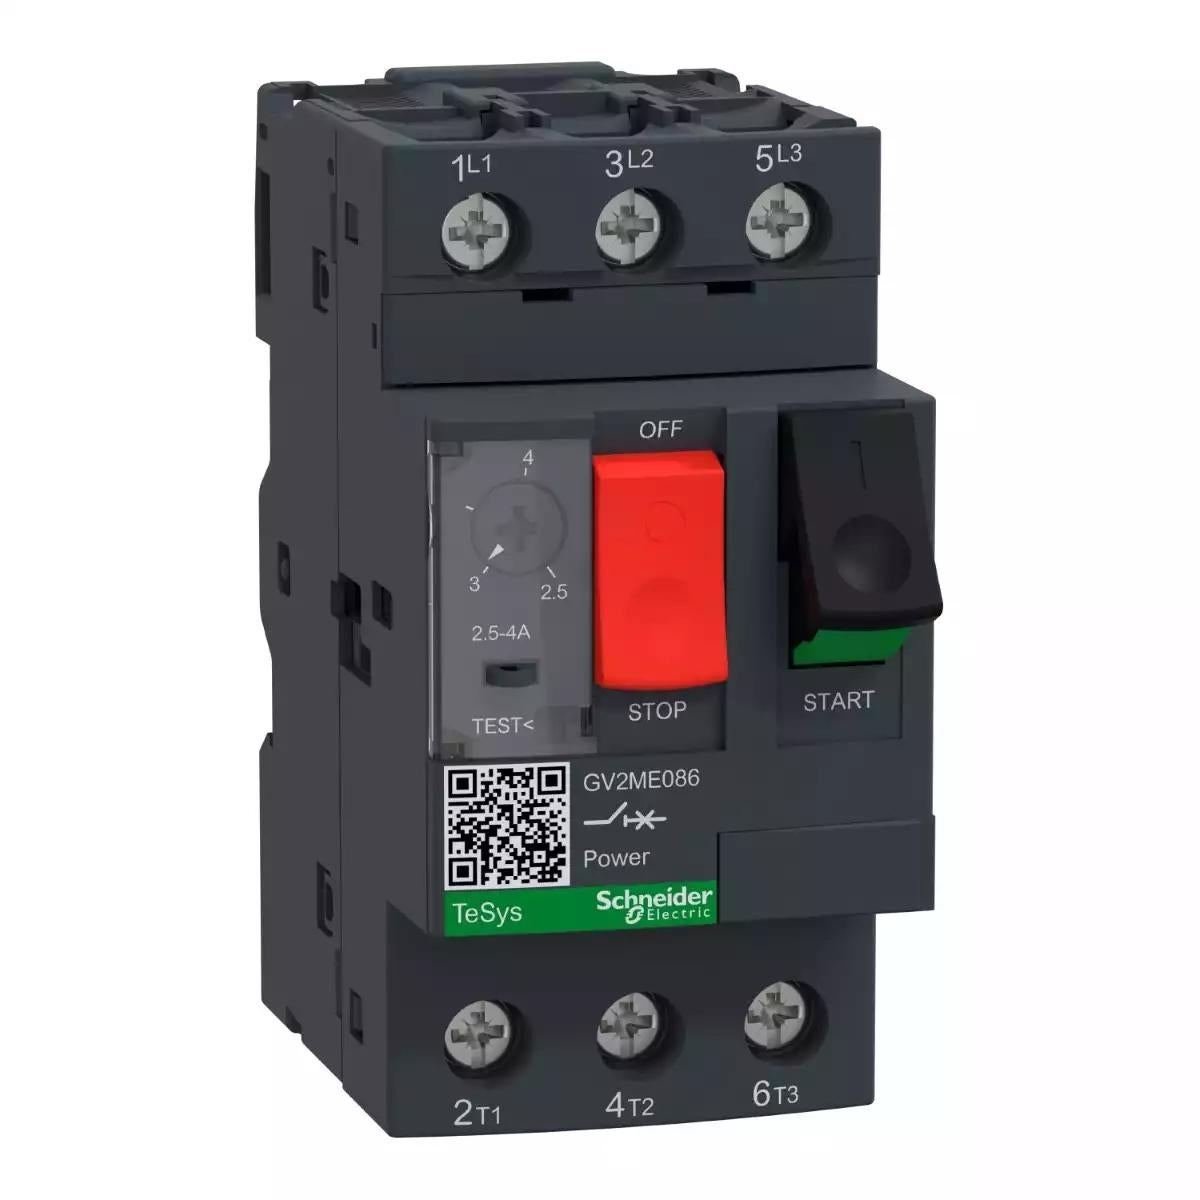 TeSys Deca frame 2, Motor circuit breaker, 3P, 2.5-4A, Thermal Magnetic, Push Button, Lugs Terminals